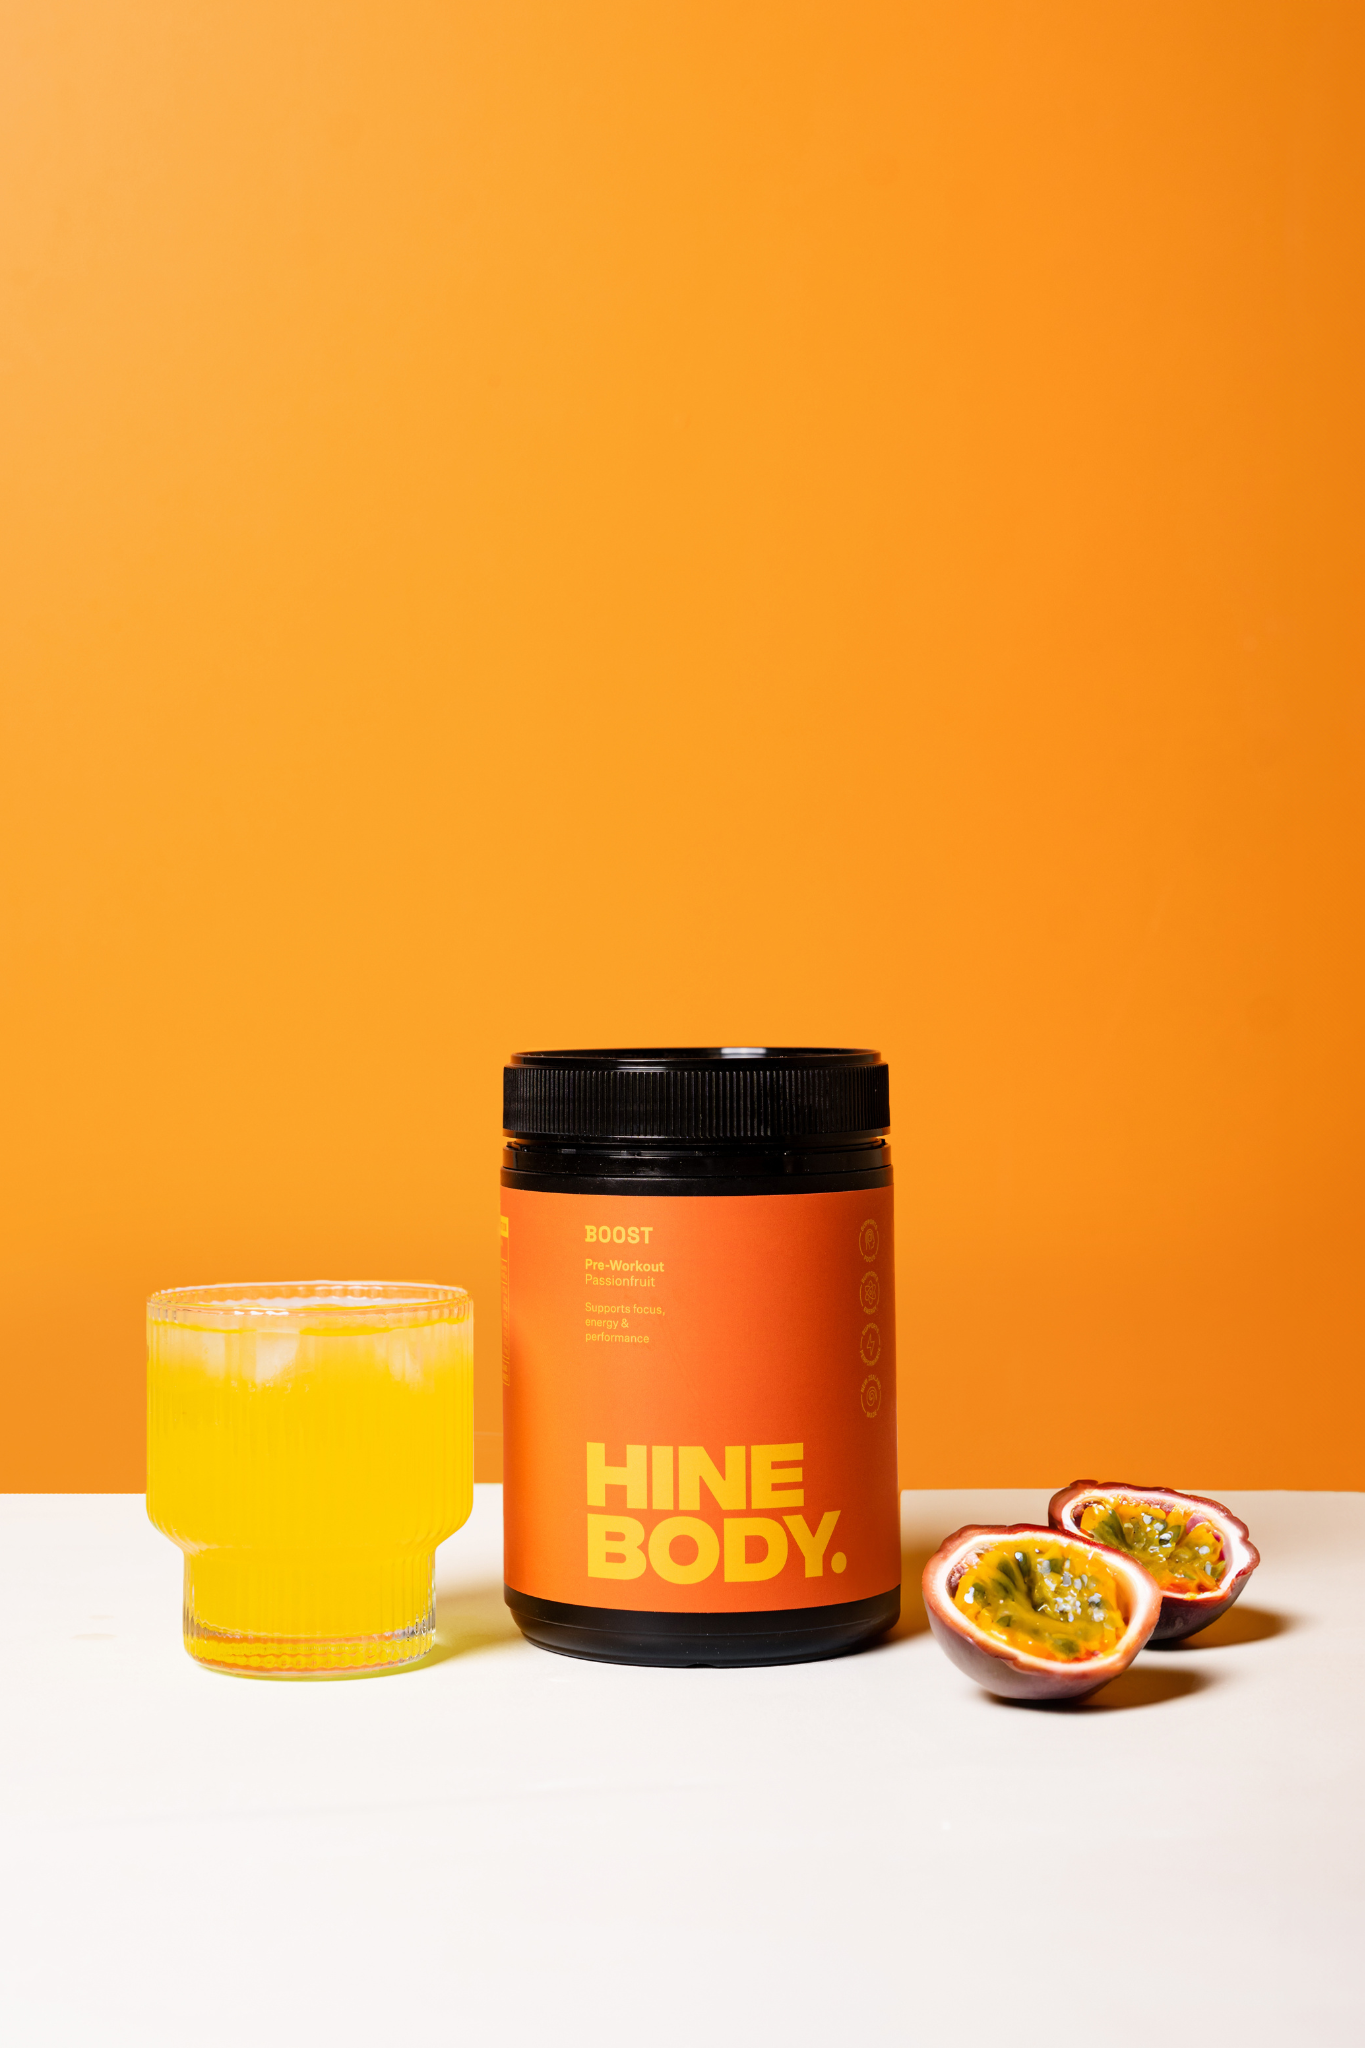 HINE BODY PRE WORKOUT PASSIONFRUIT